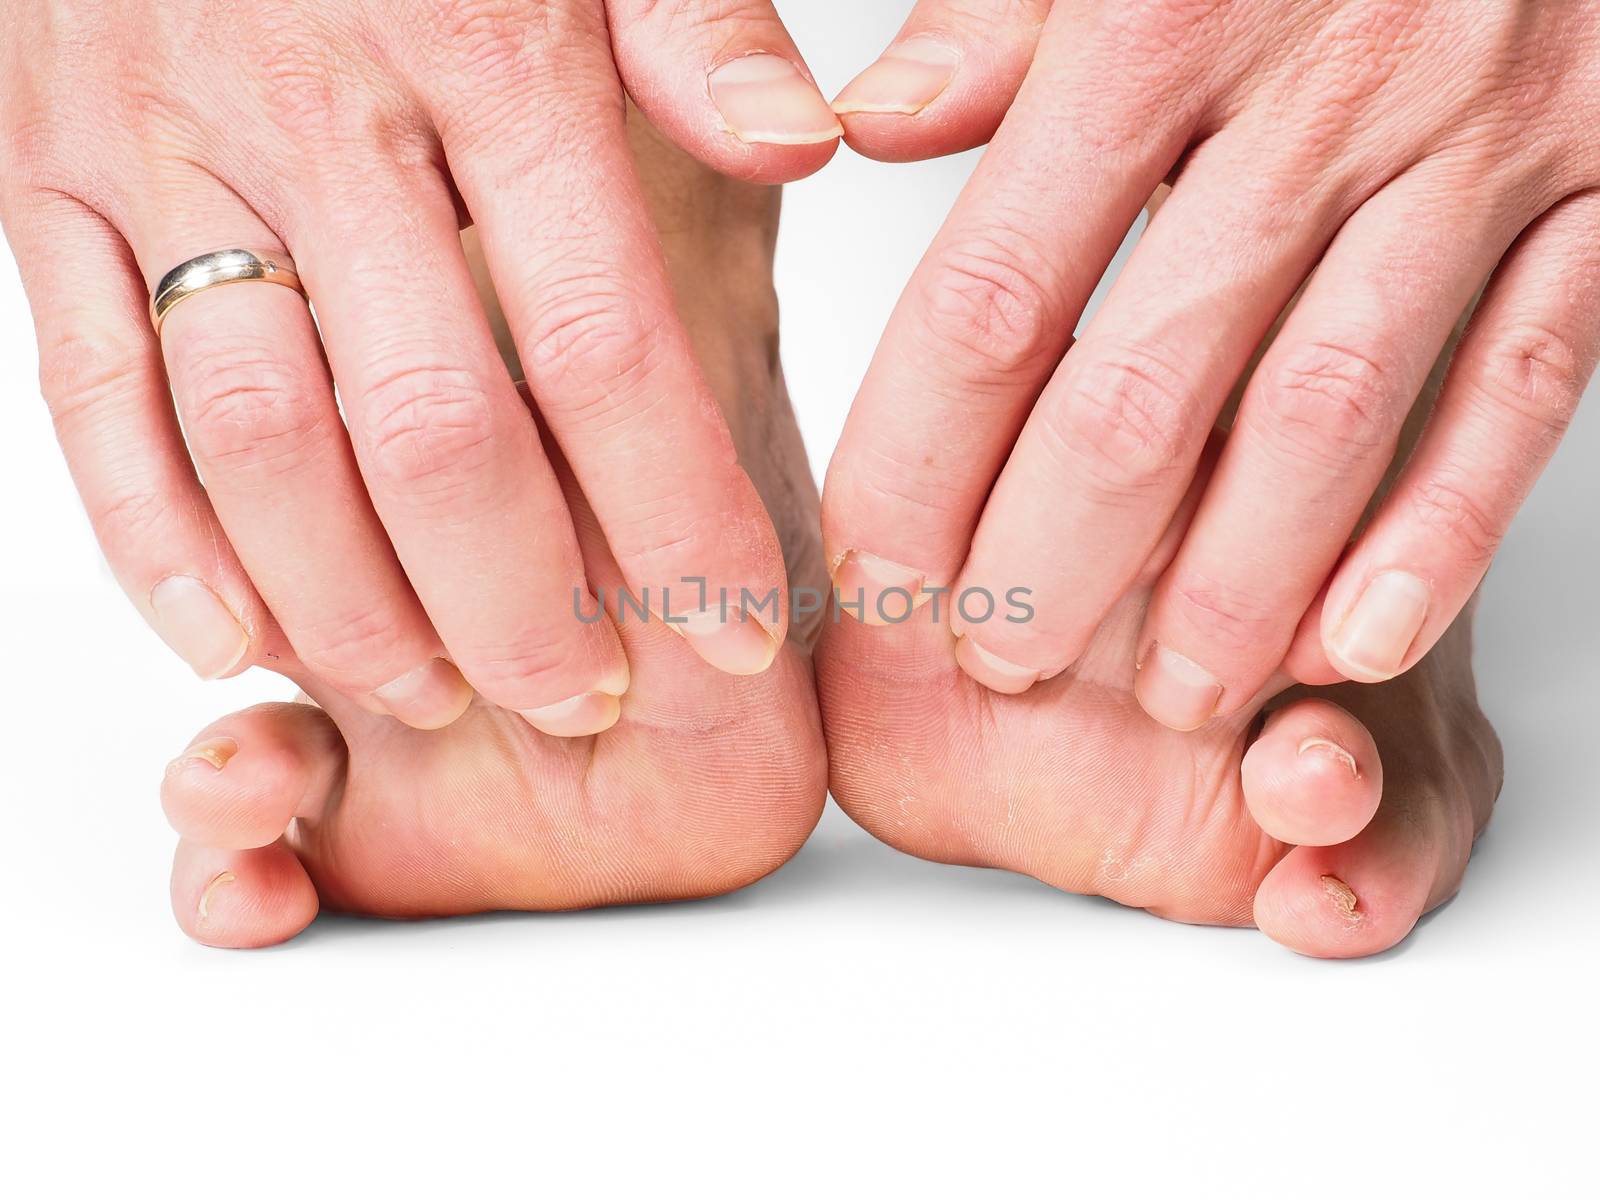 Hands pulling toes on barefoot feet by Arvebettum